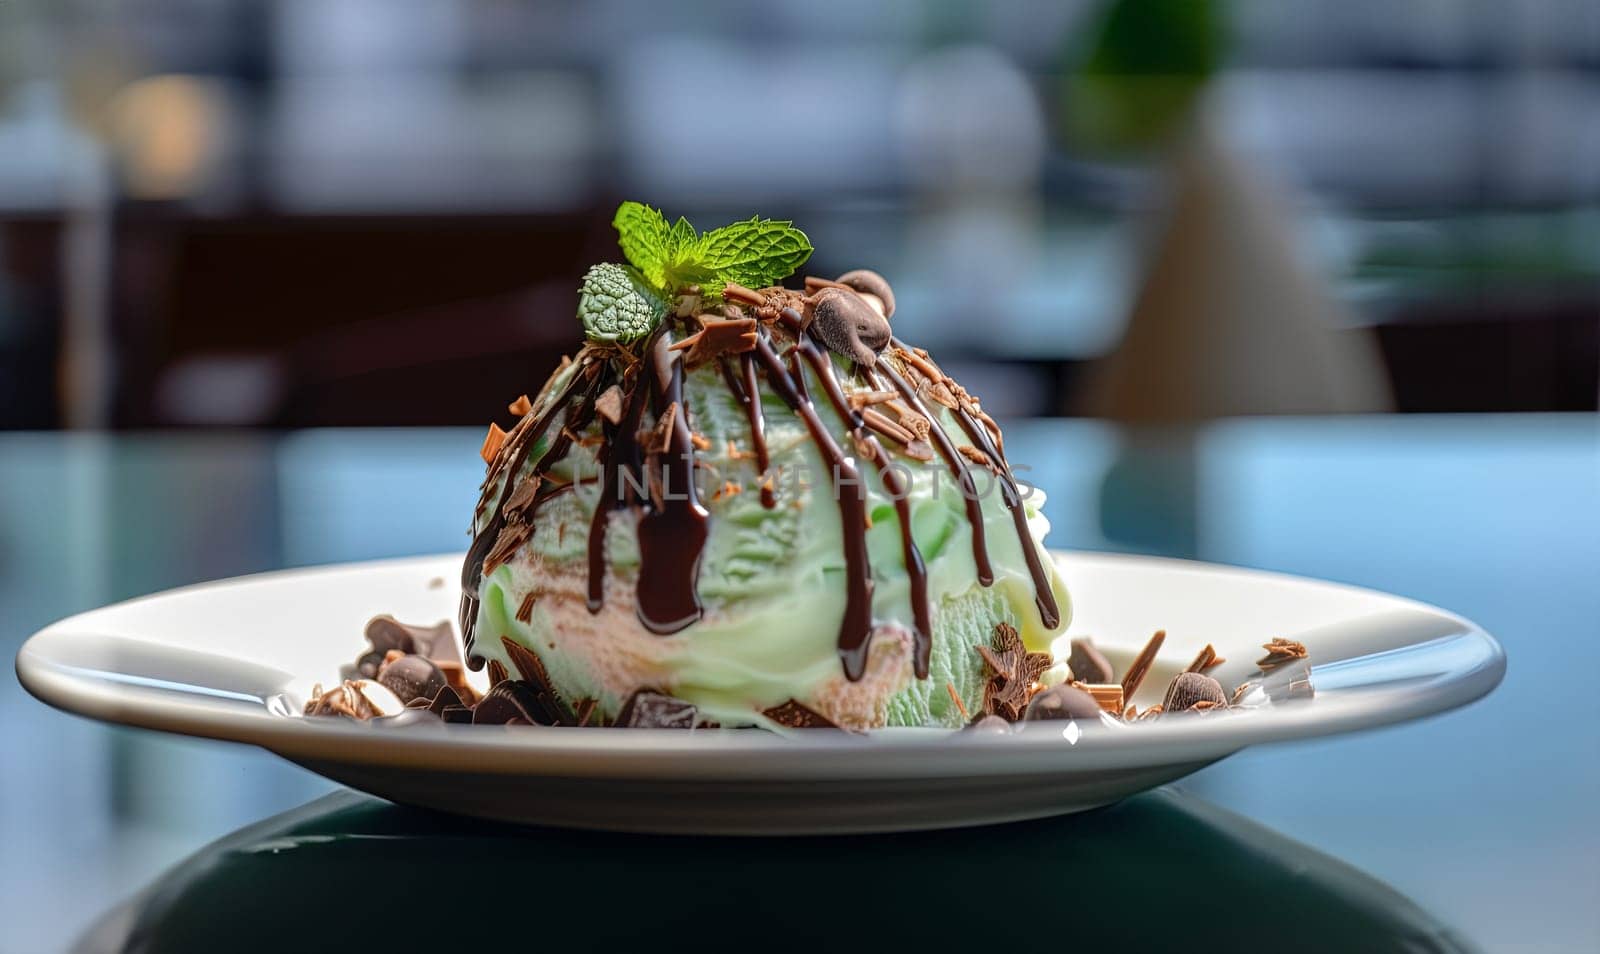 Delicious Ice Cream Dessert In The Pistachio Taste With Chocolate And Mint In A Cafe, Dessert In Cafe